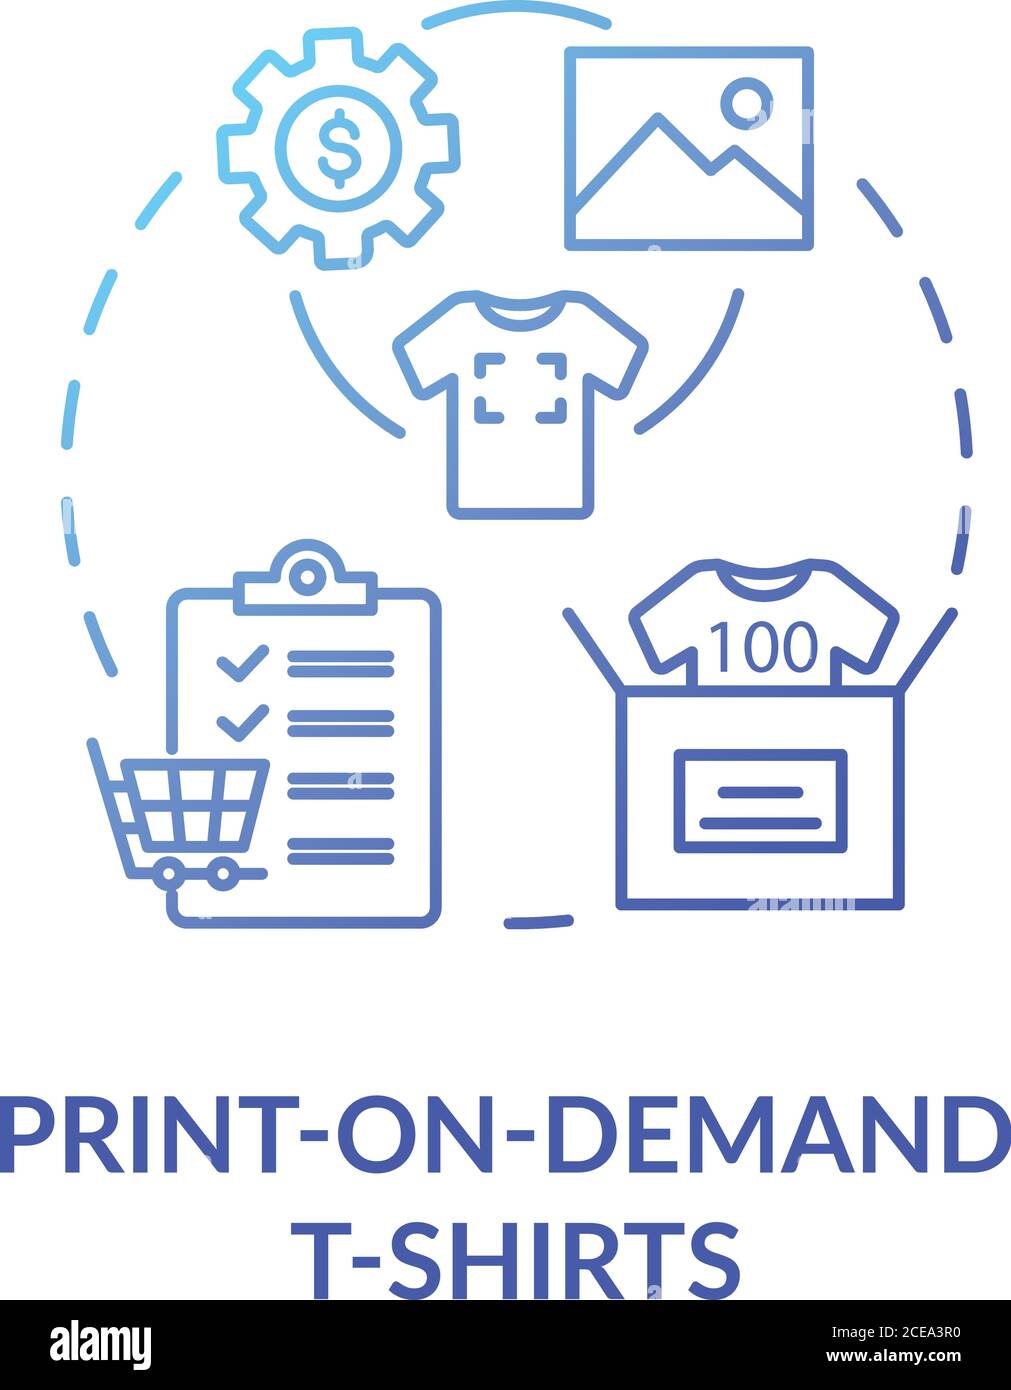 Print on demand T shirts concept icon. Fashion marketplace, online business  idea thin line illustration. Customizable clothing service. Vector isolate  Stock Vector Image & Art - Alamy